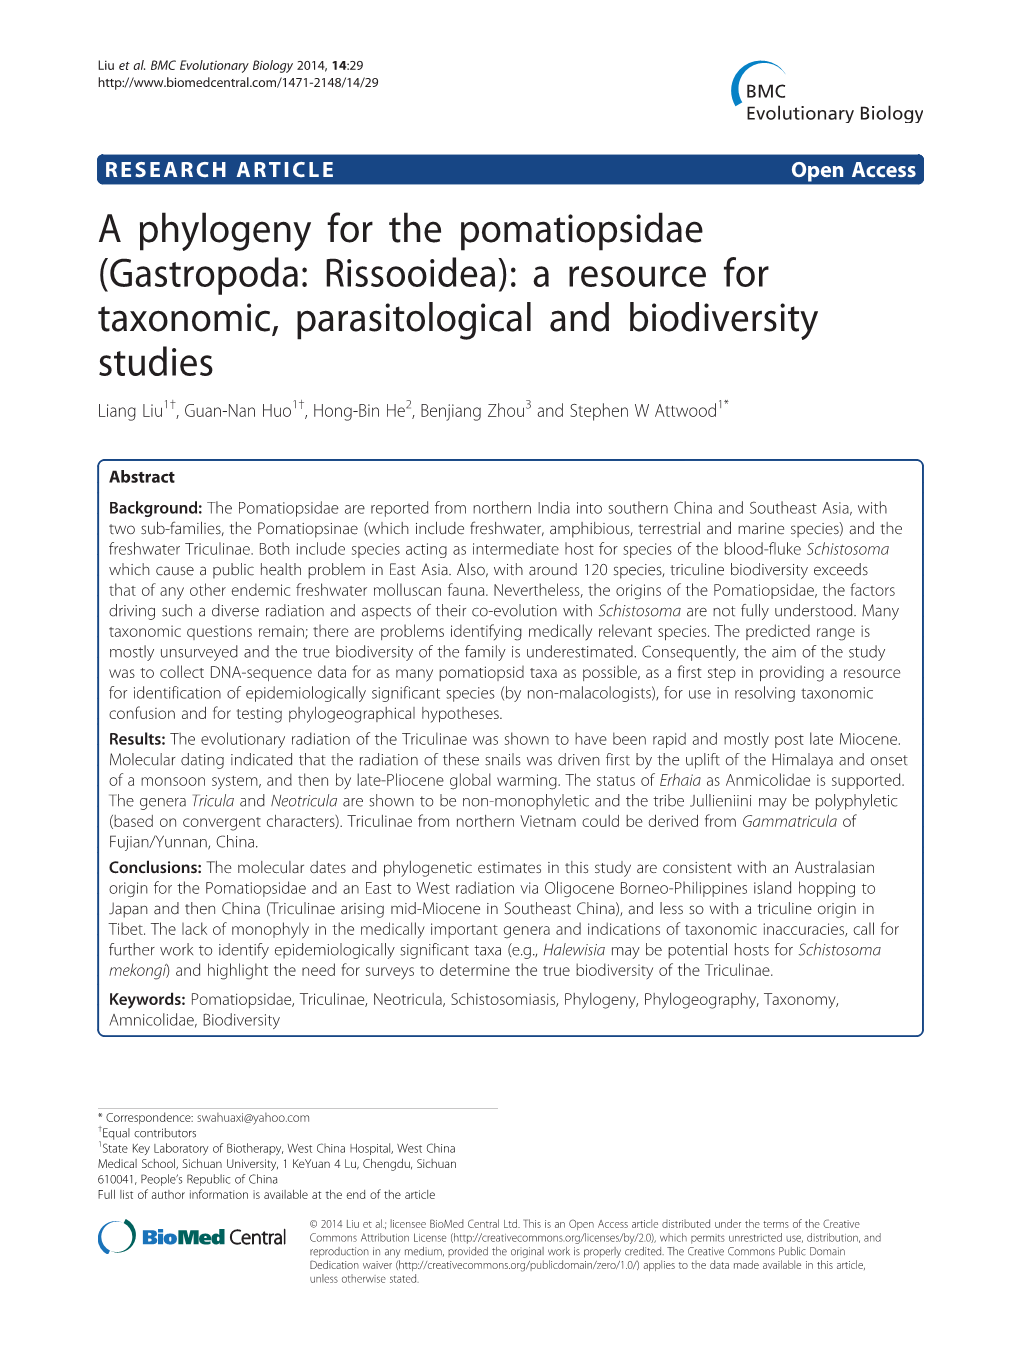 A Phylogeny for the Pomatiopsidae (Gastropoda: Rissooidea): a Resource for Taxonomic, Parasitological and Biodiversity Studies